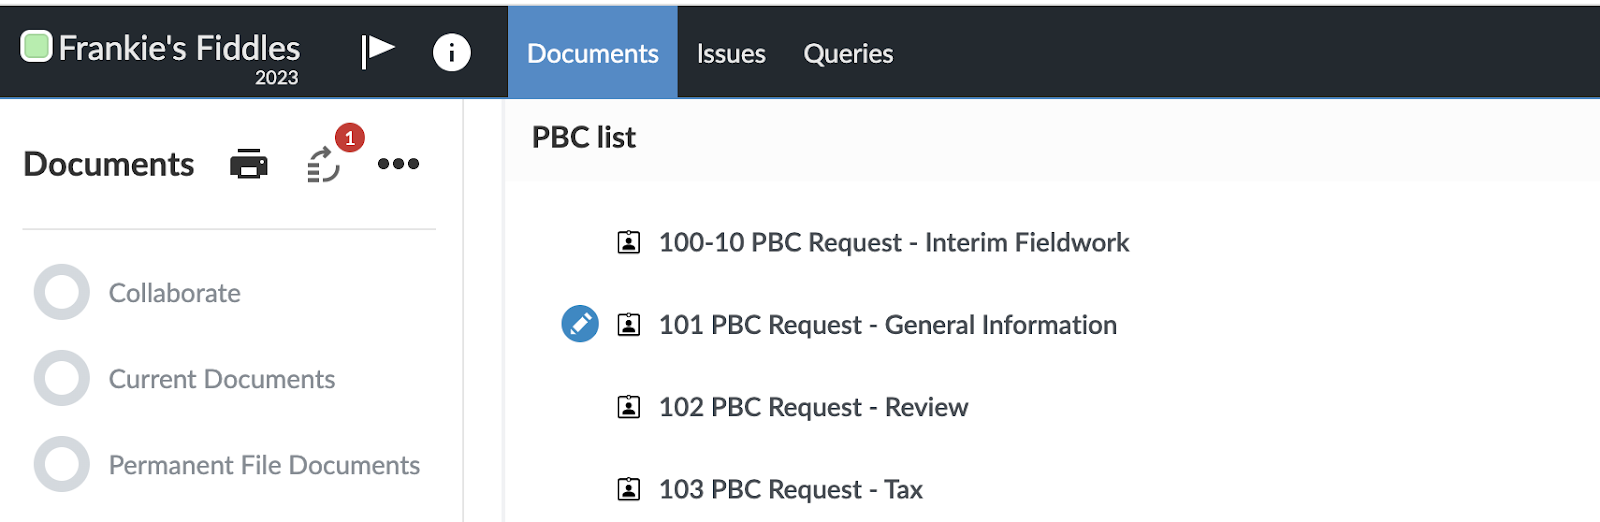 Client completed the 101 PBC Request - General Information document.